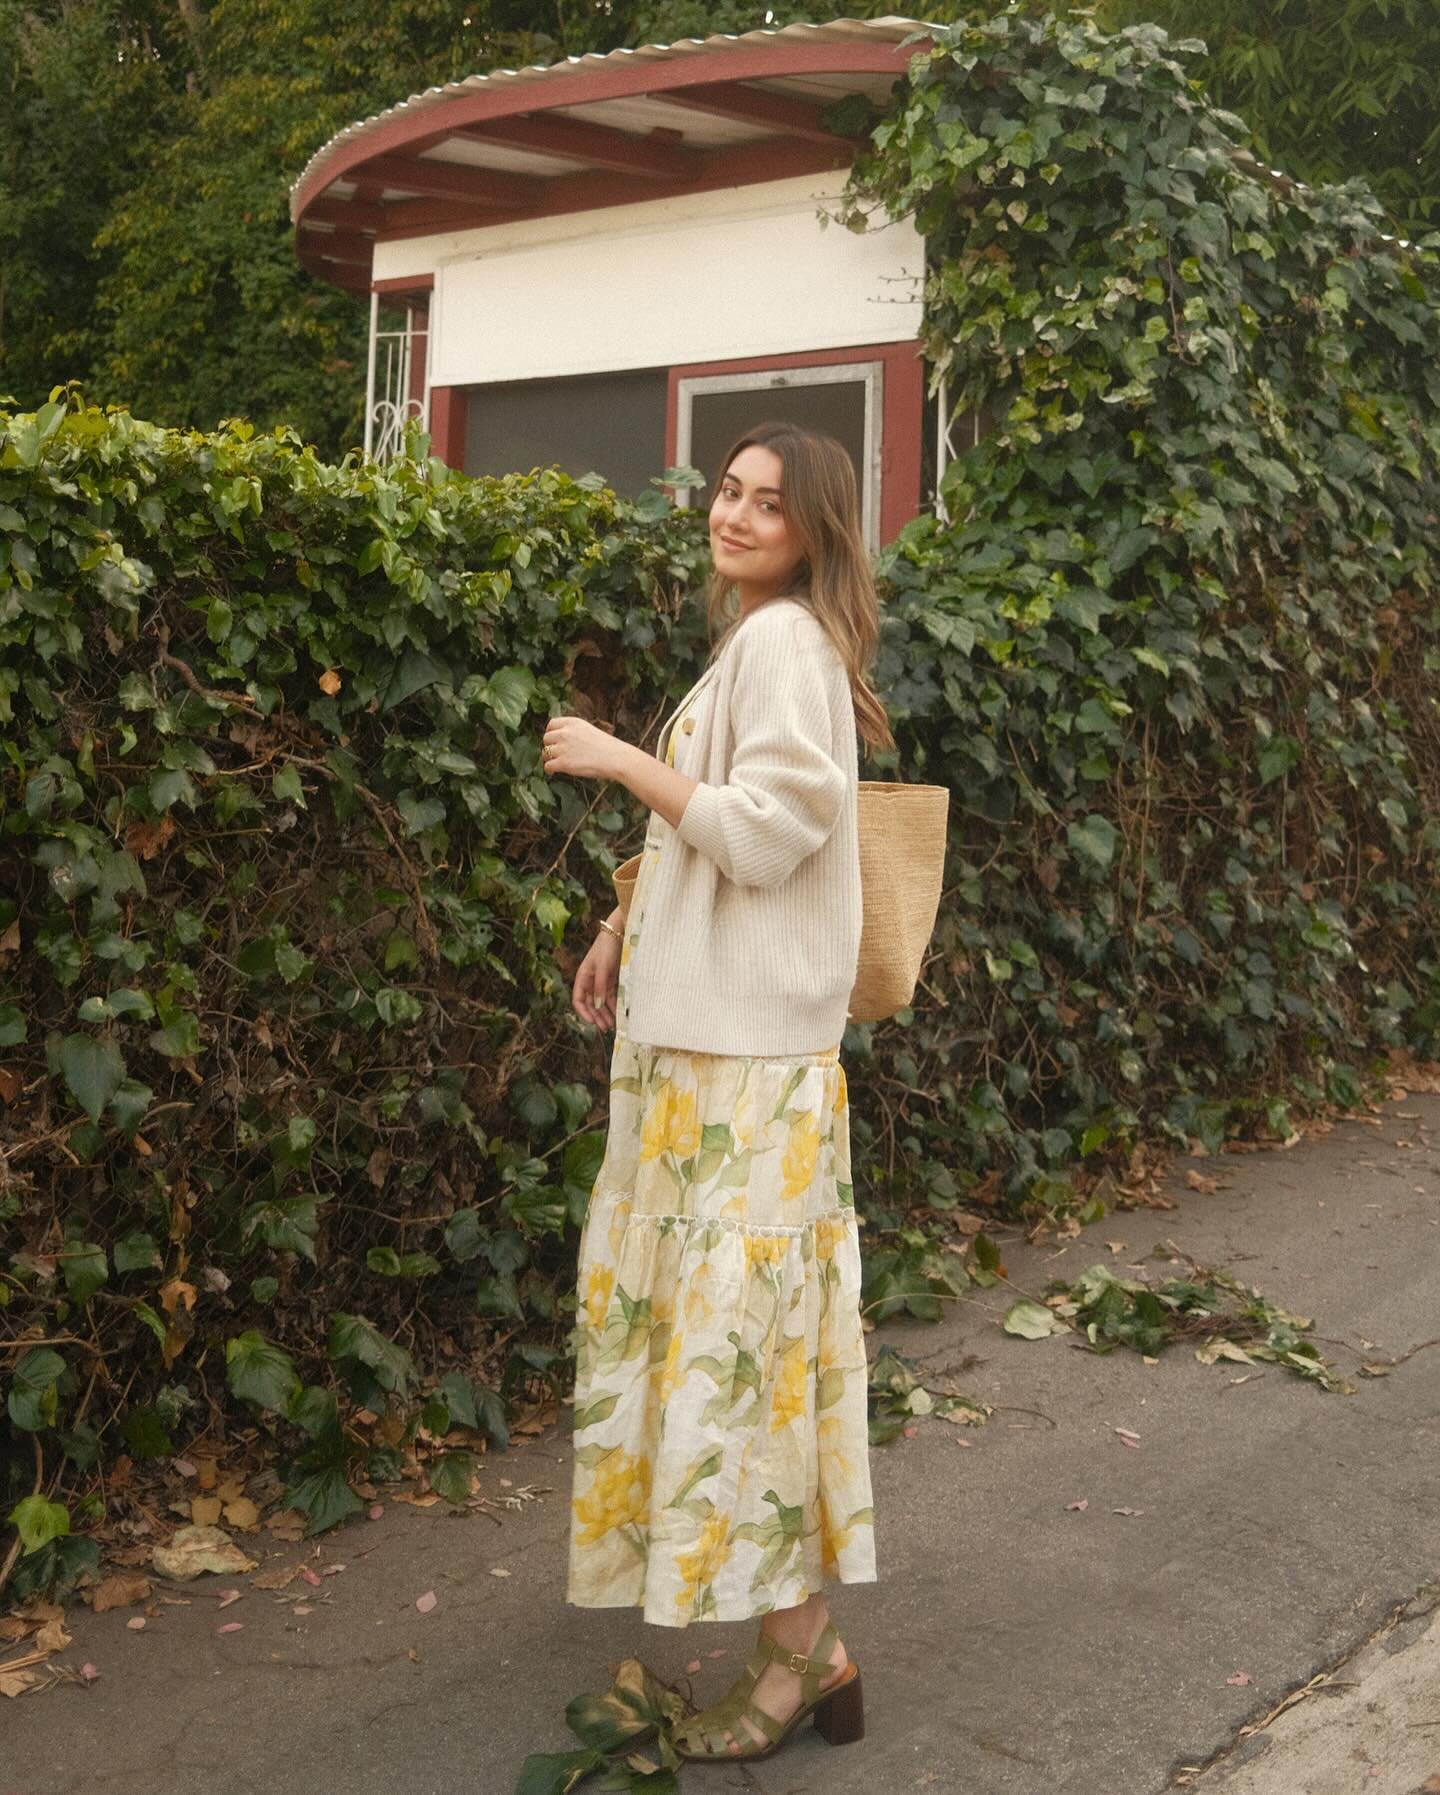 spring dresses + woven bags, it&rsquo;s my favorite time of year 🌼 

dress: @christylynncollection 
shoes + bag: @sezane 
cardigan: @everlane